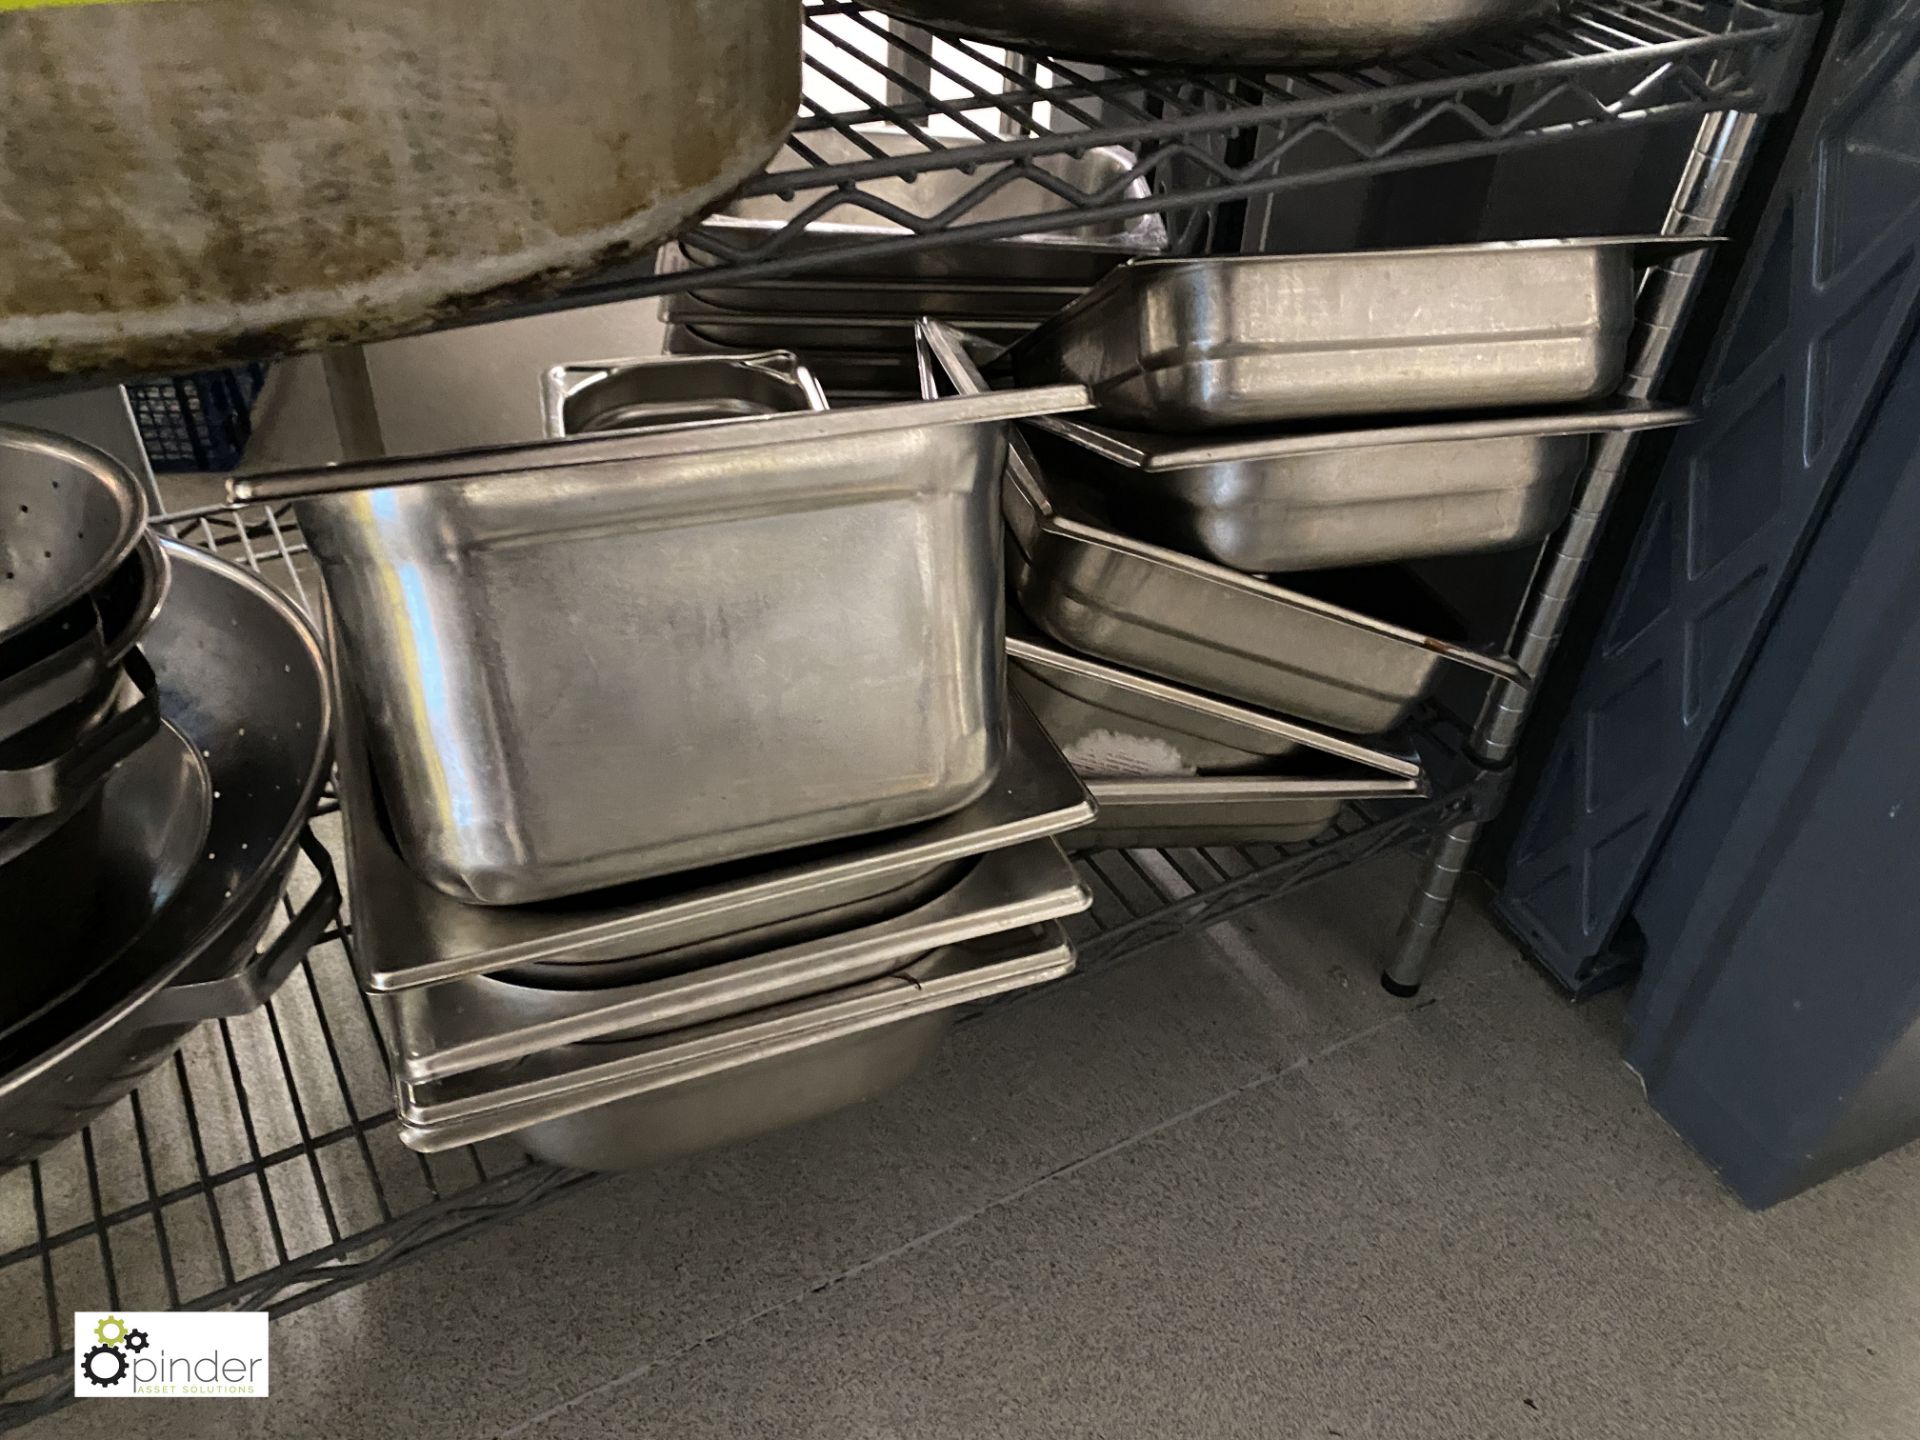 Large quantity Cooking Pots, Oven Trays, Utensils, etc, to rack (located in Kitchen) - Image 10 of 10